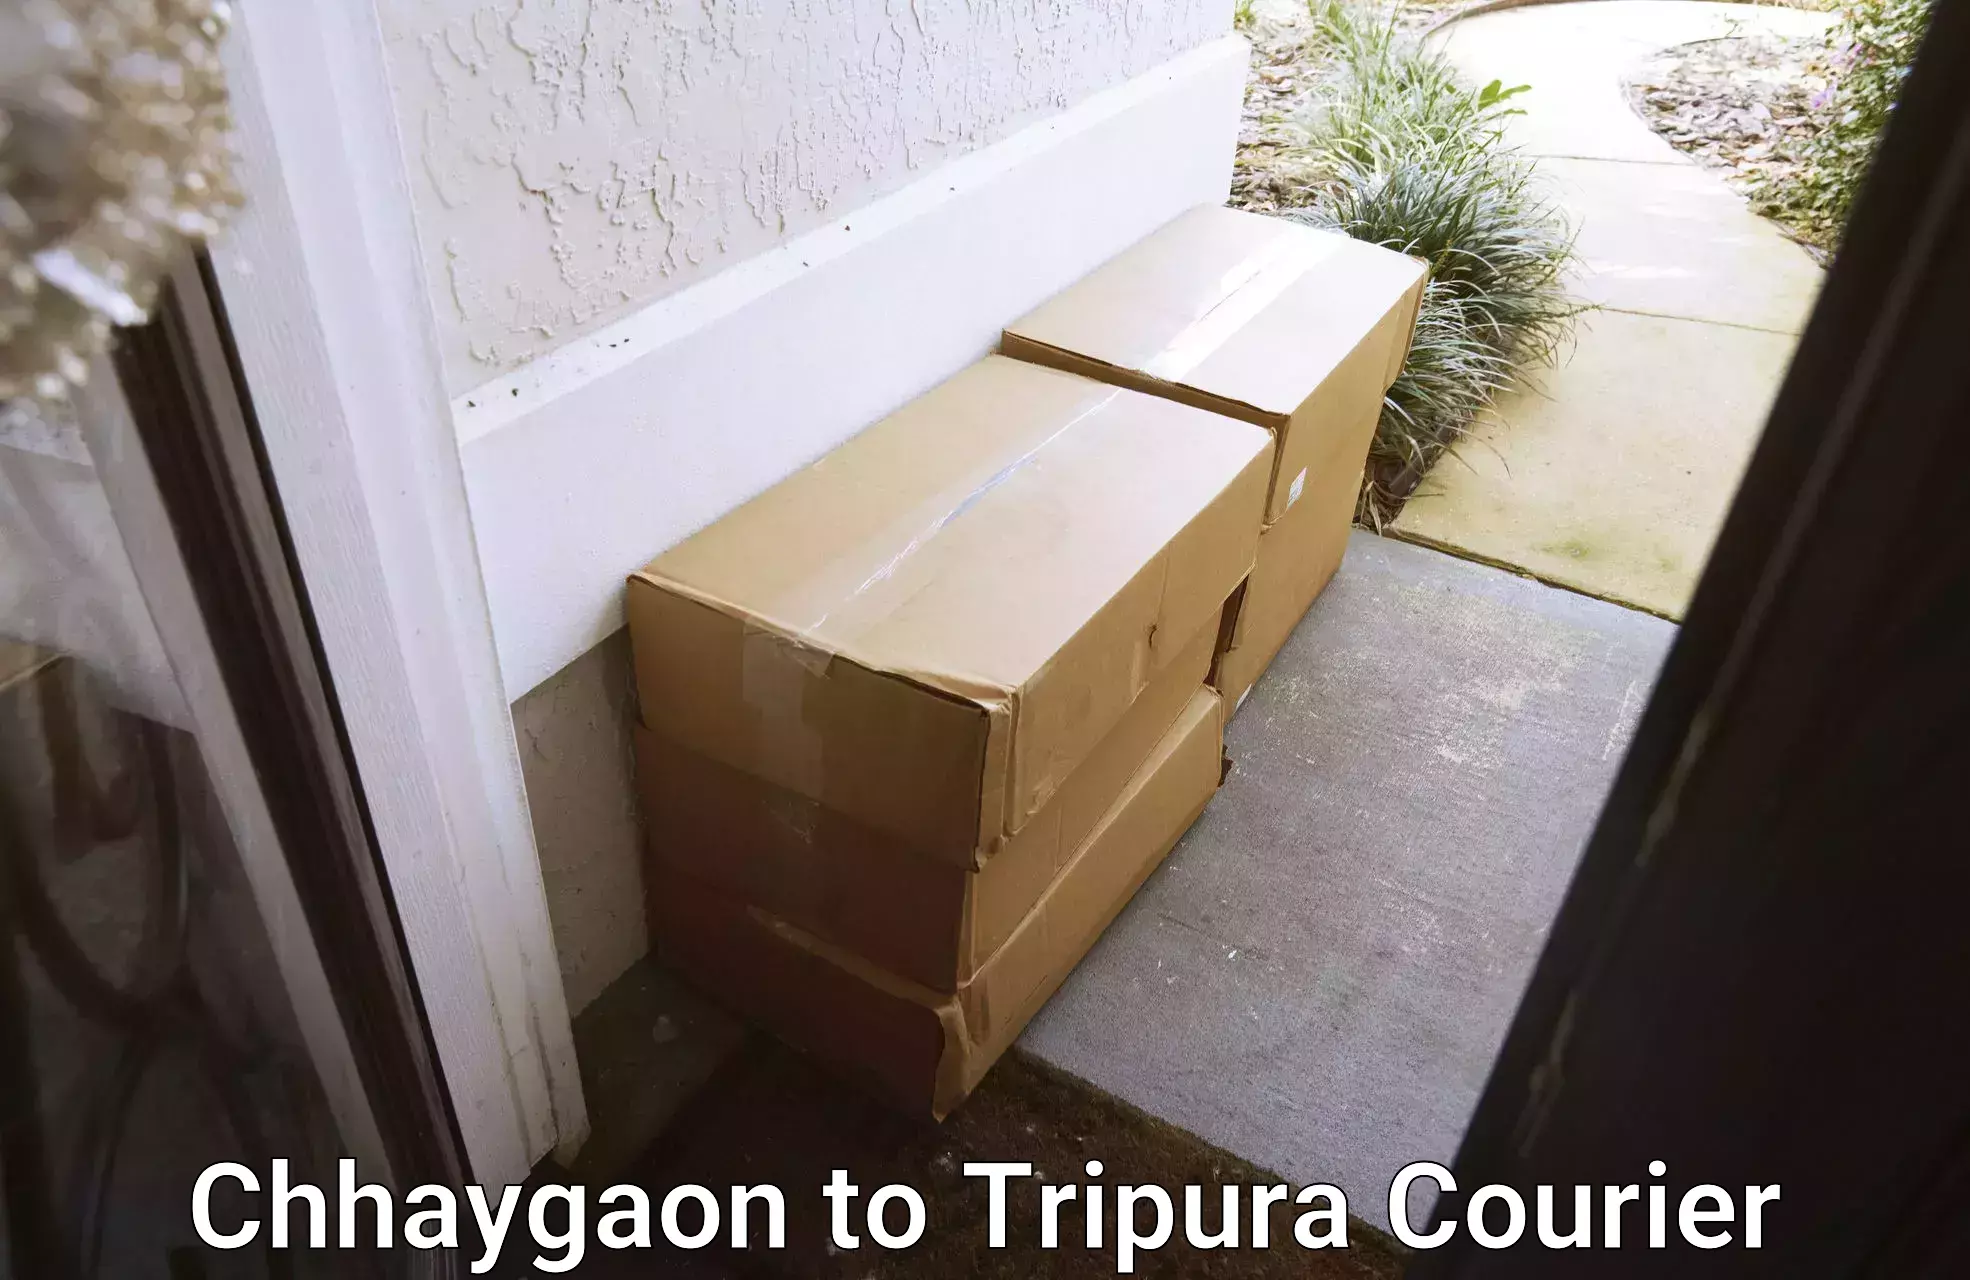 Tailored delivery services in Chhaygaon to Udaipur Tripura